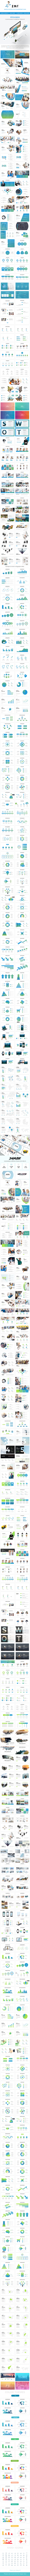 Bundle 2 in 1 Simple & Effective Pitch Deck Powerpoint Template 2019